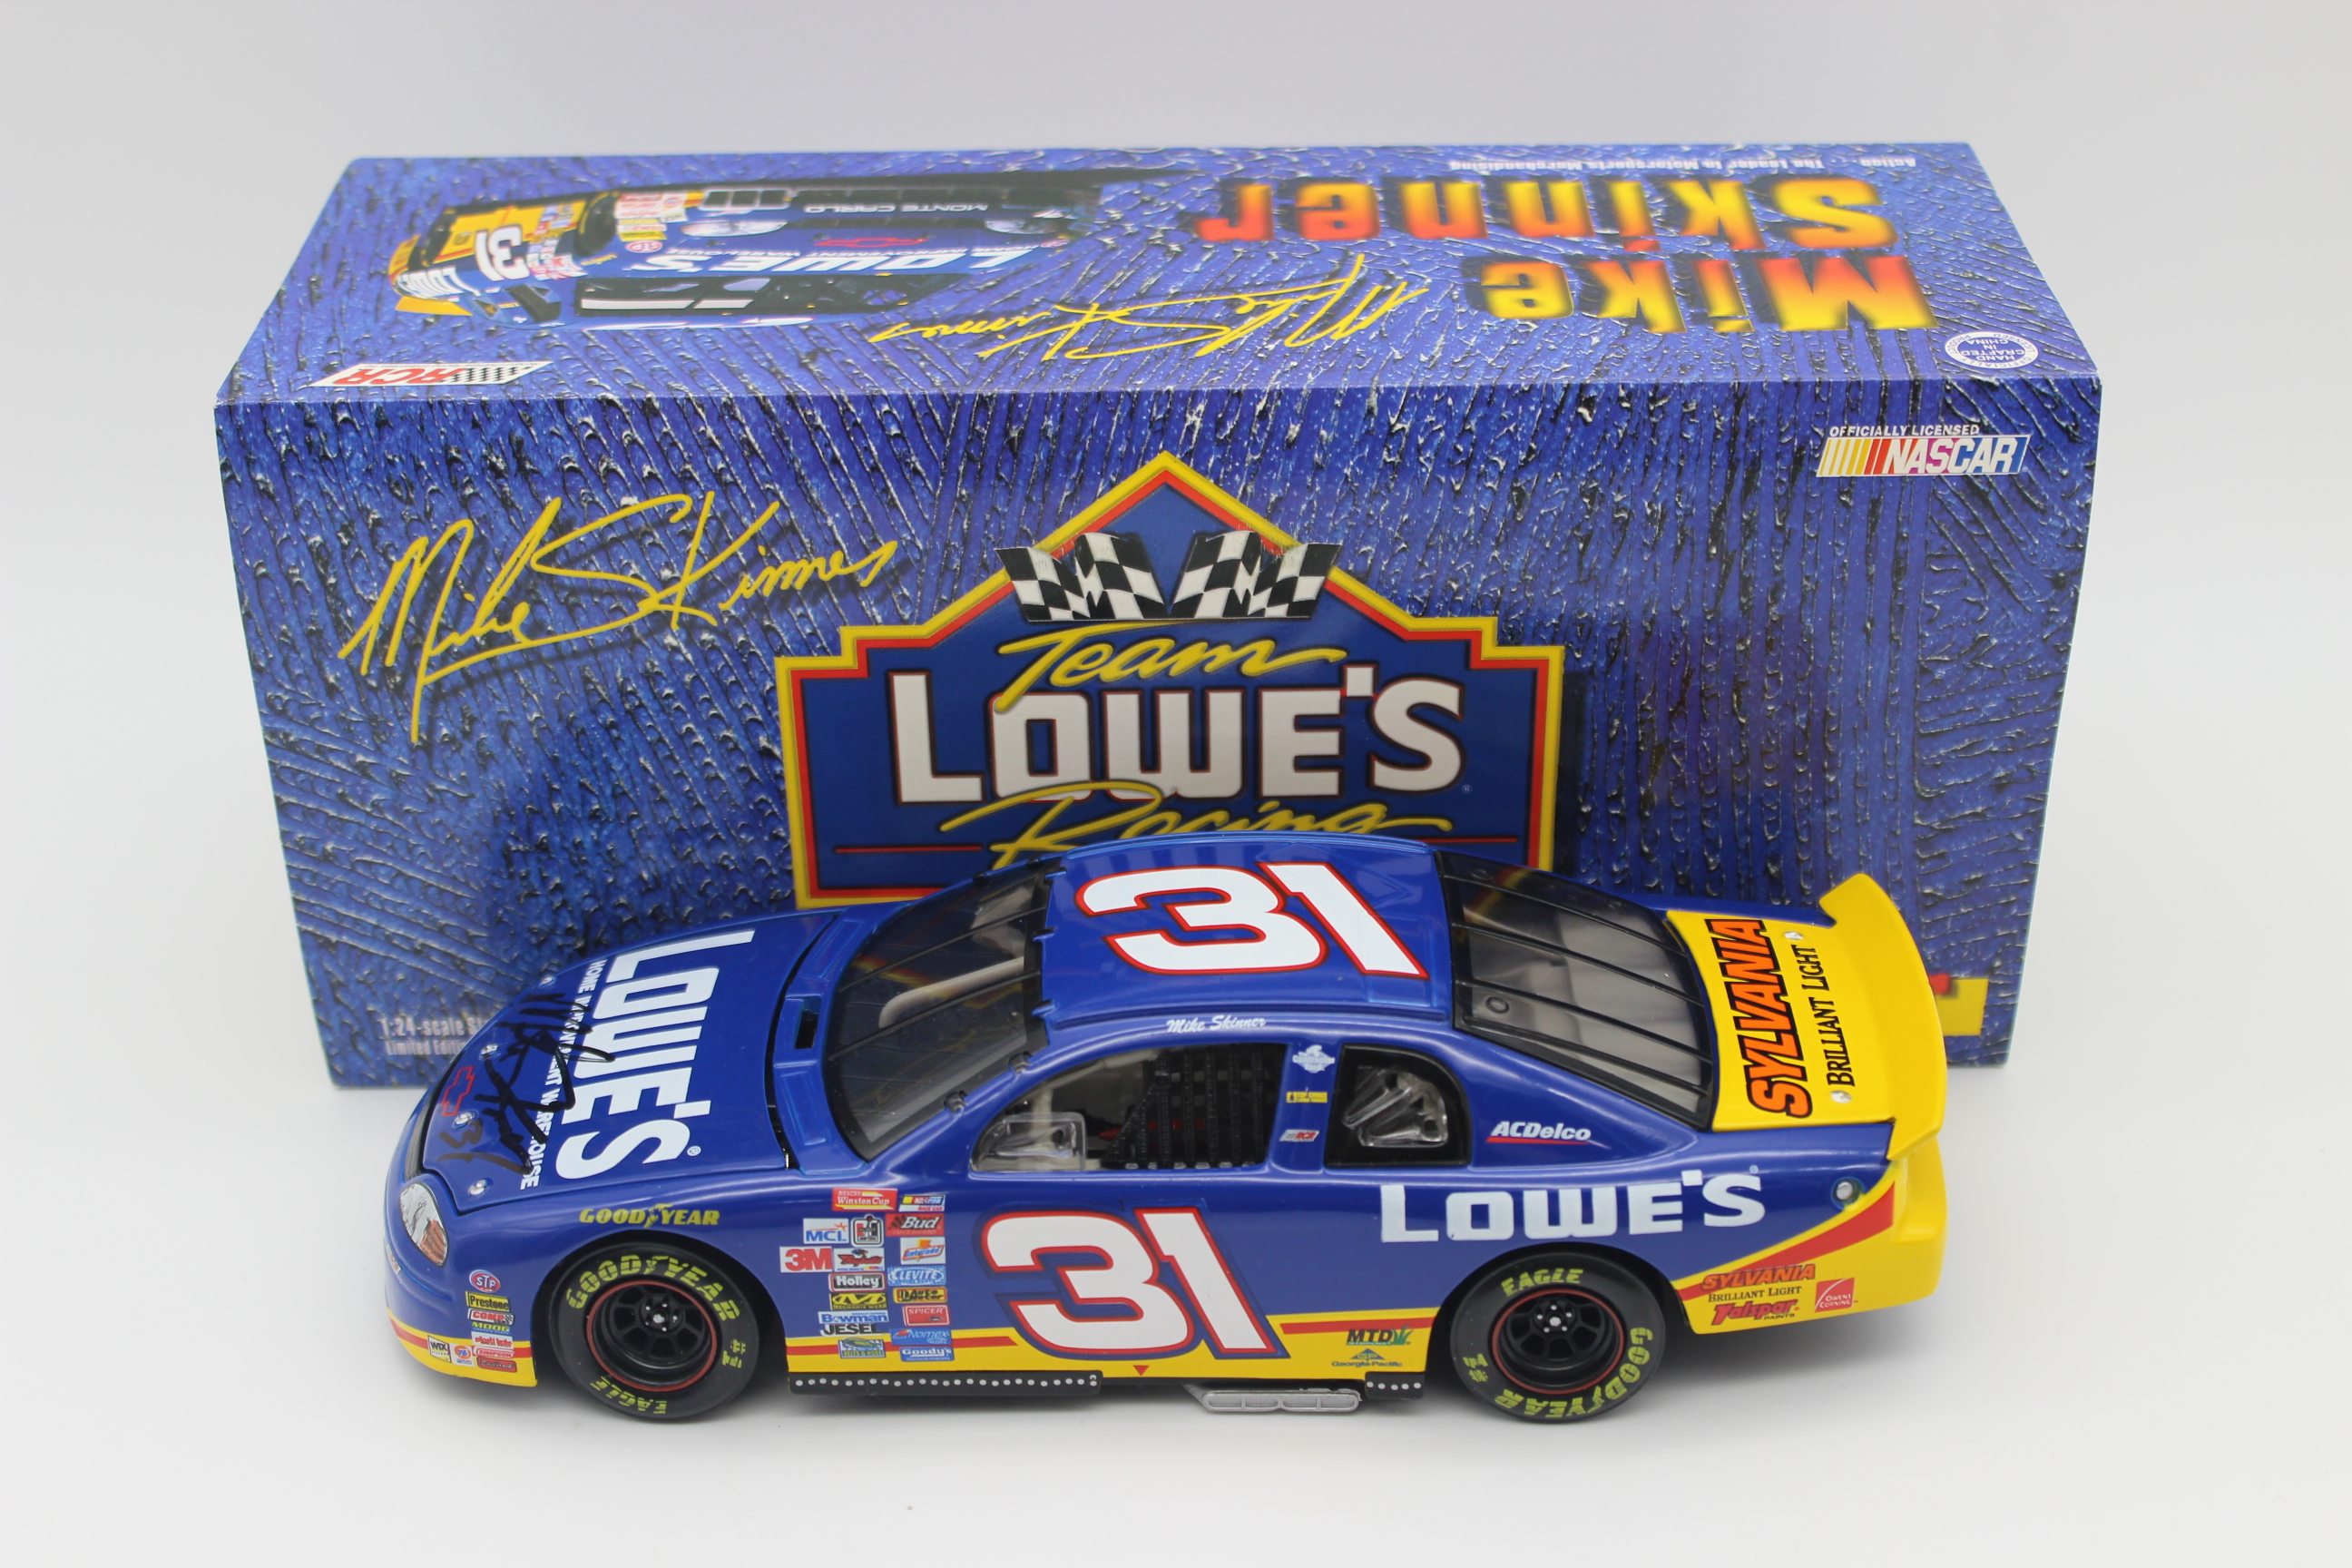 Mike Skinner Autographed 2001 Lowe's 1:24 Nascar Diecast